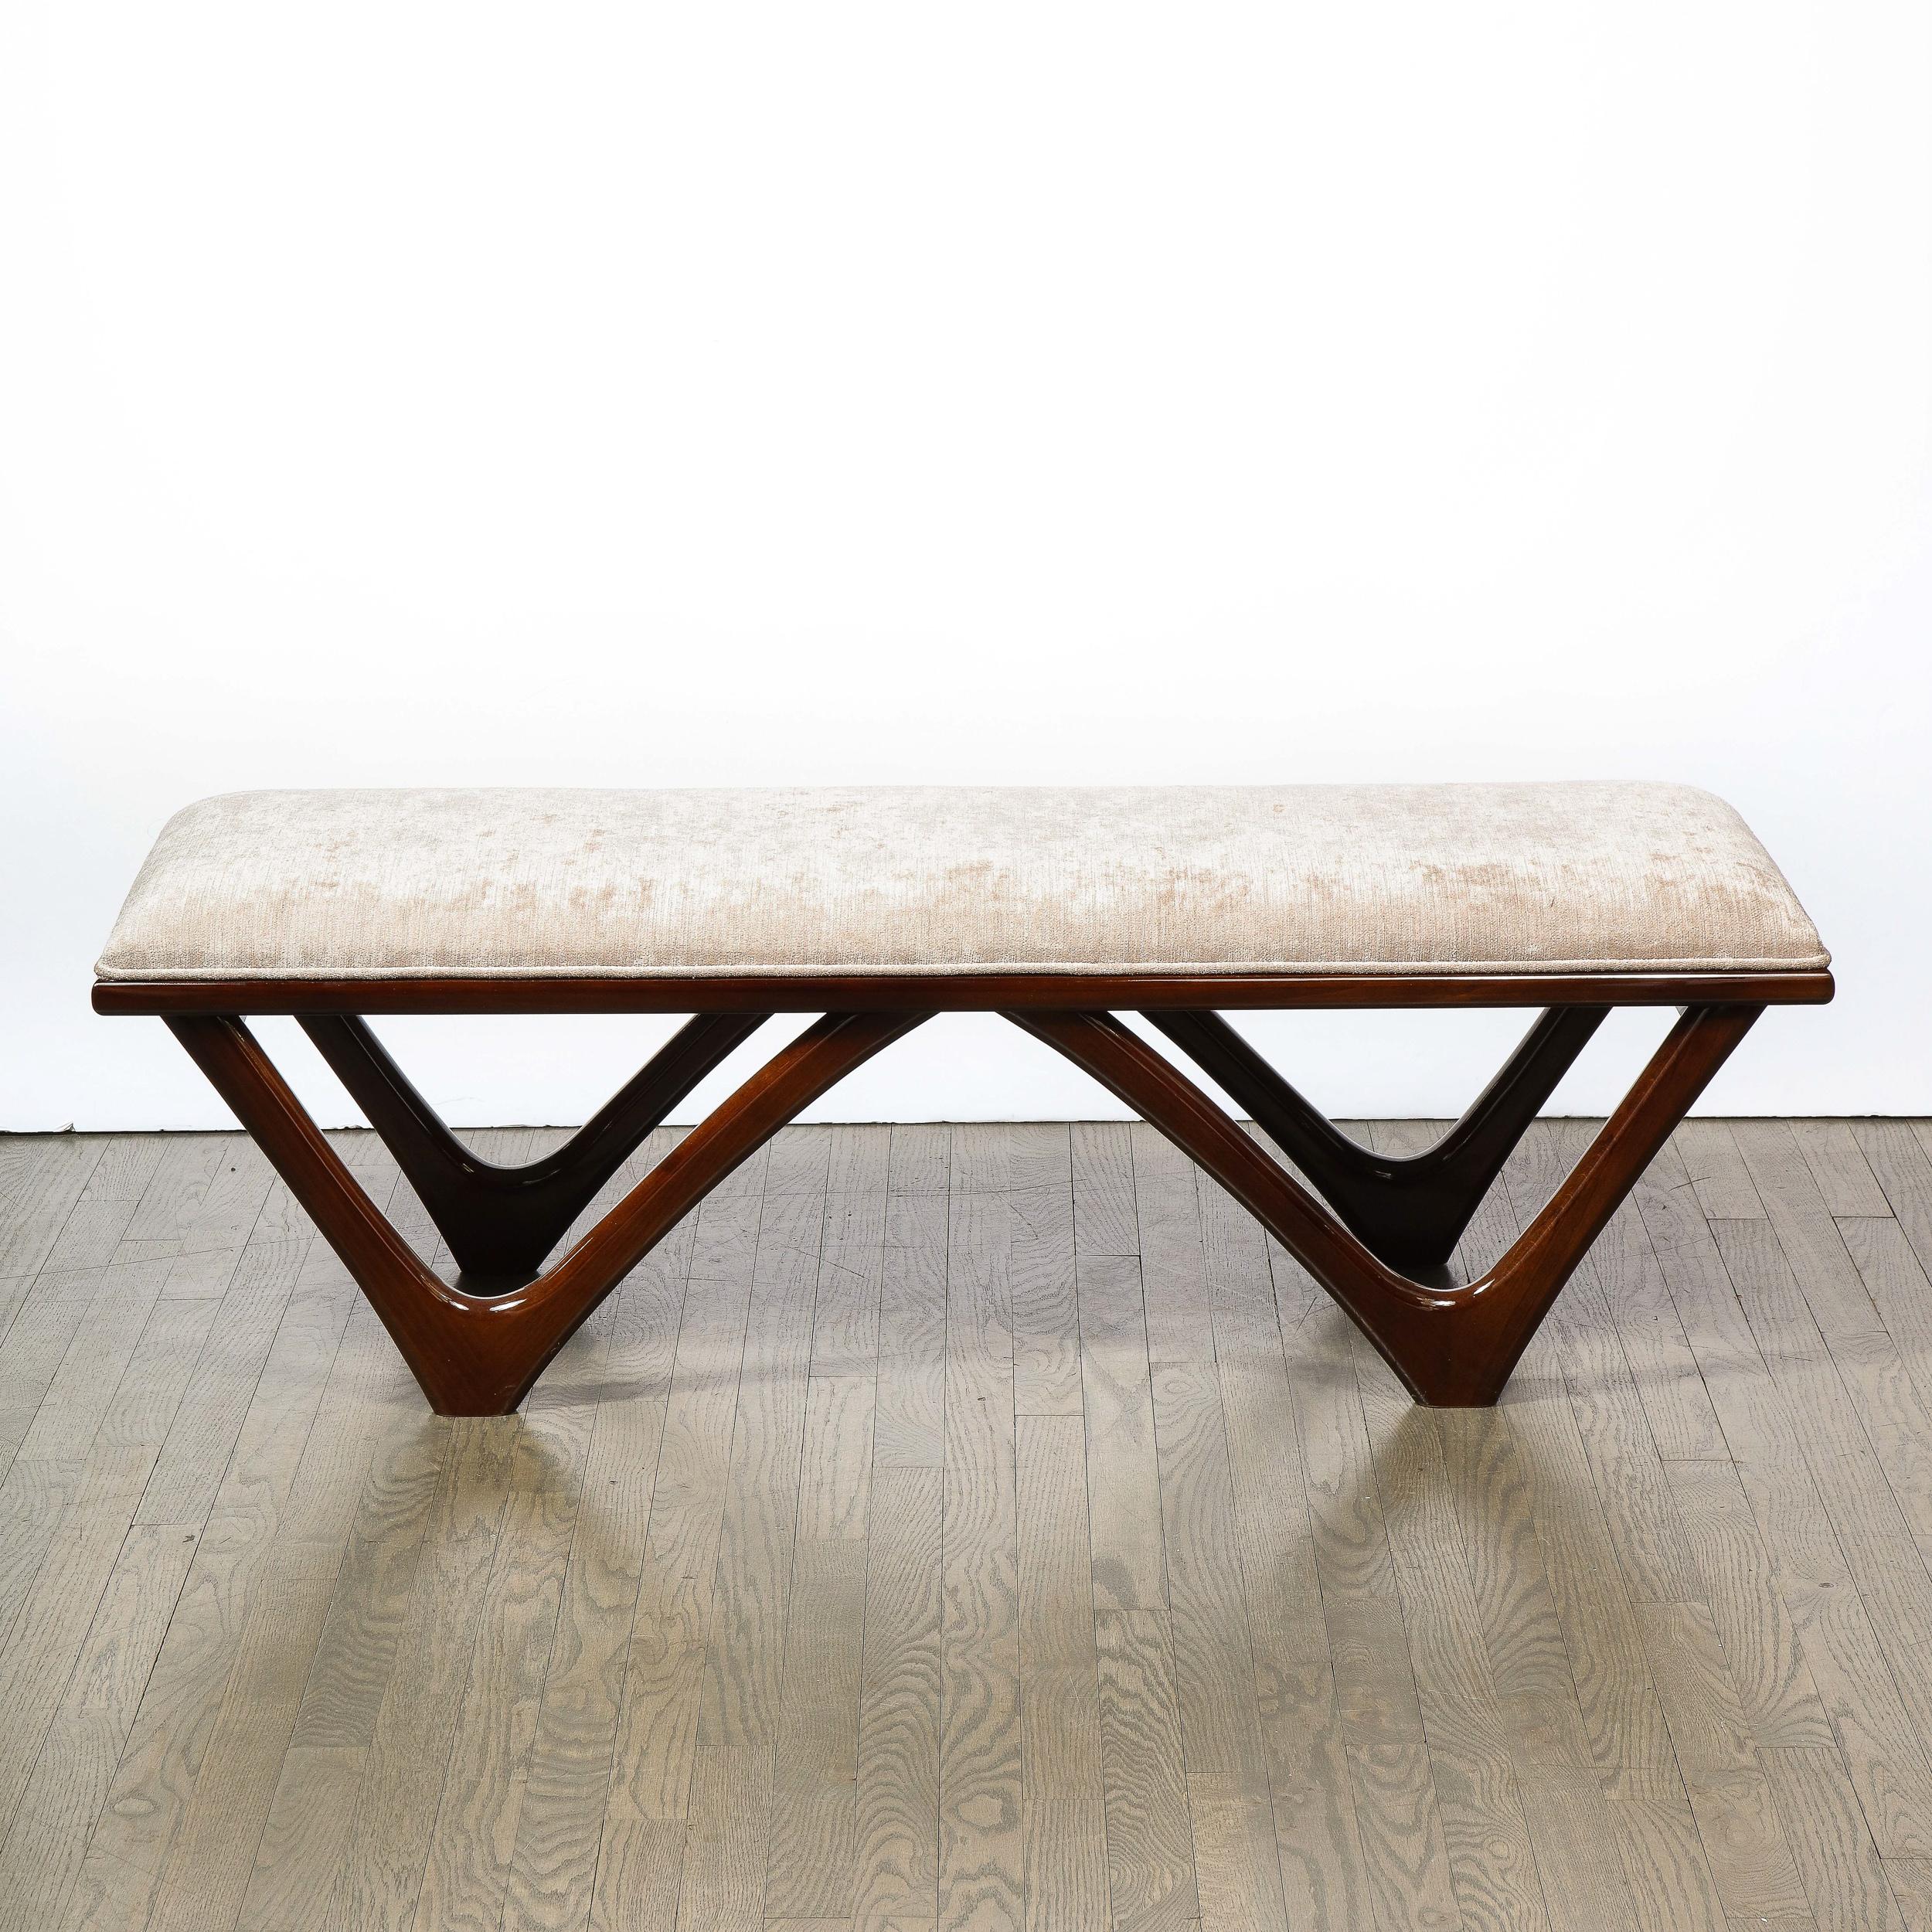 This elegant Mid Century Modern walnut and taupe bench was realized in Italian, circa 1950. It features a sculptural high gloss walnut base composed of two adjoining inverse arch 